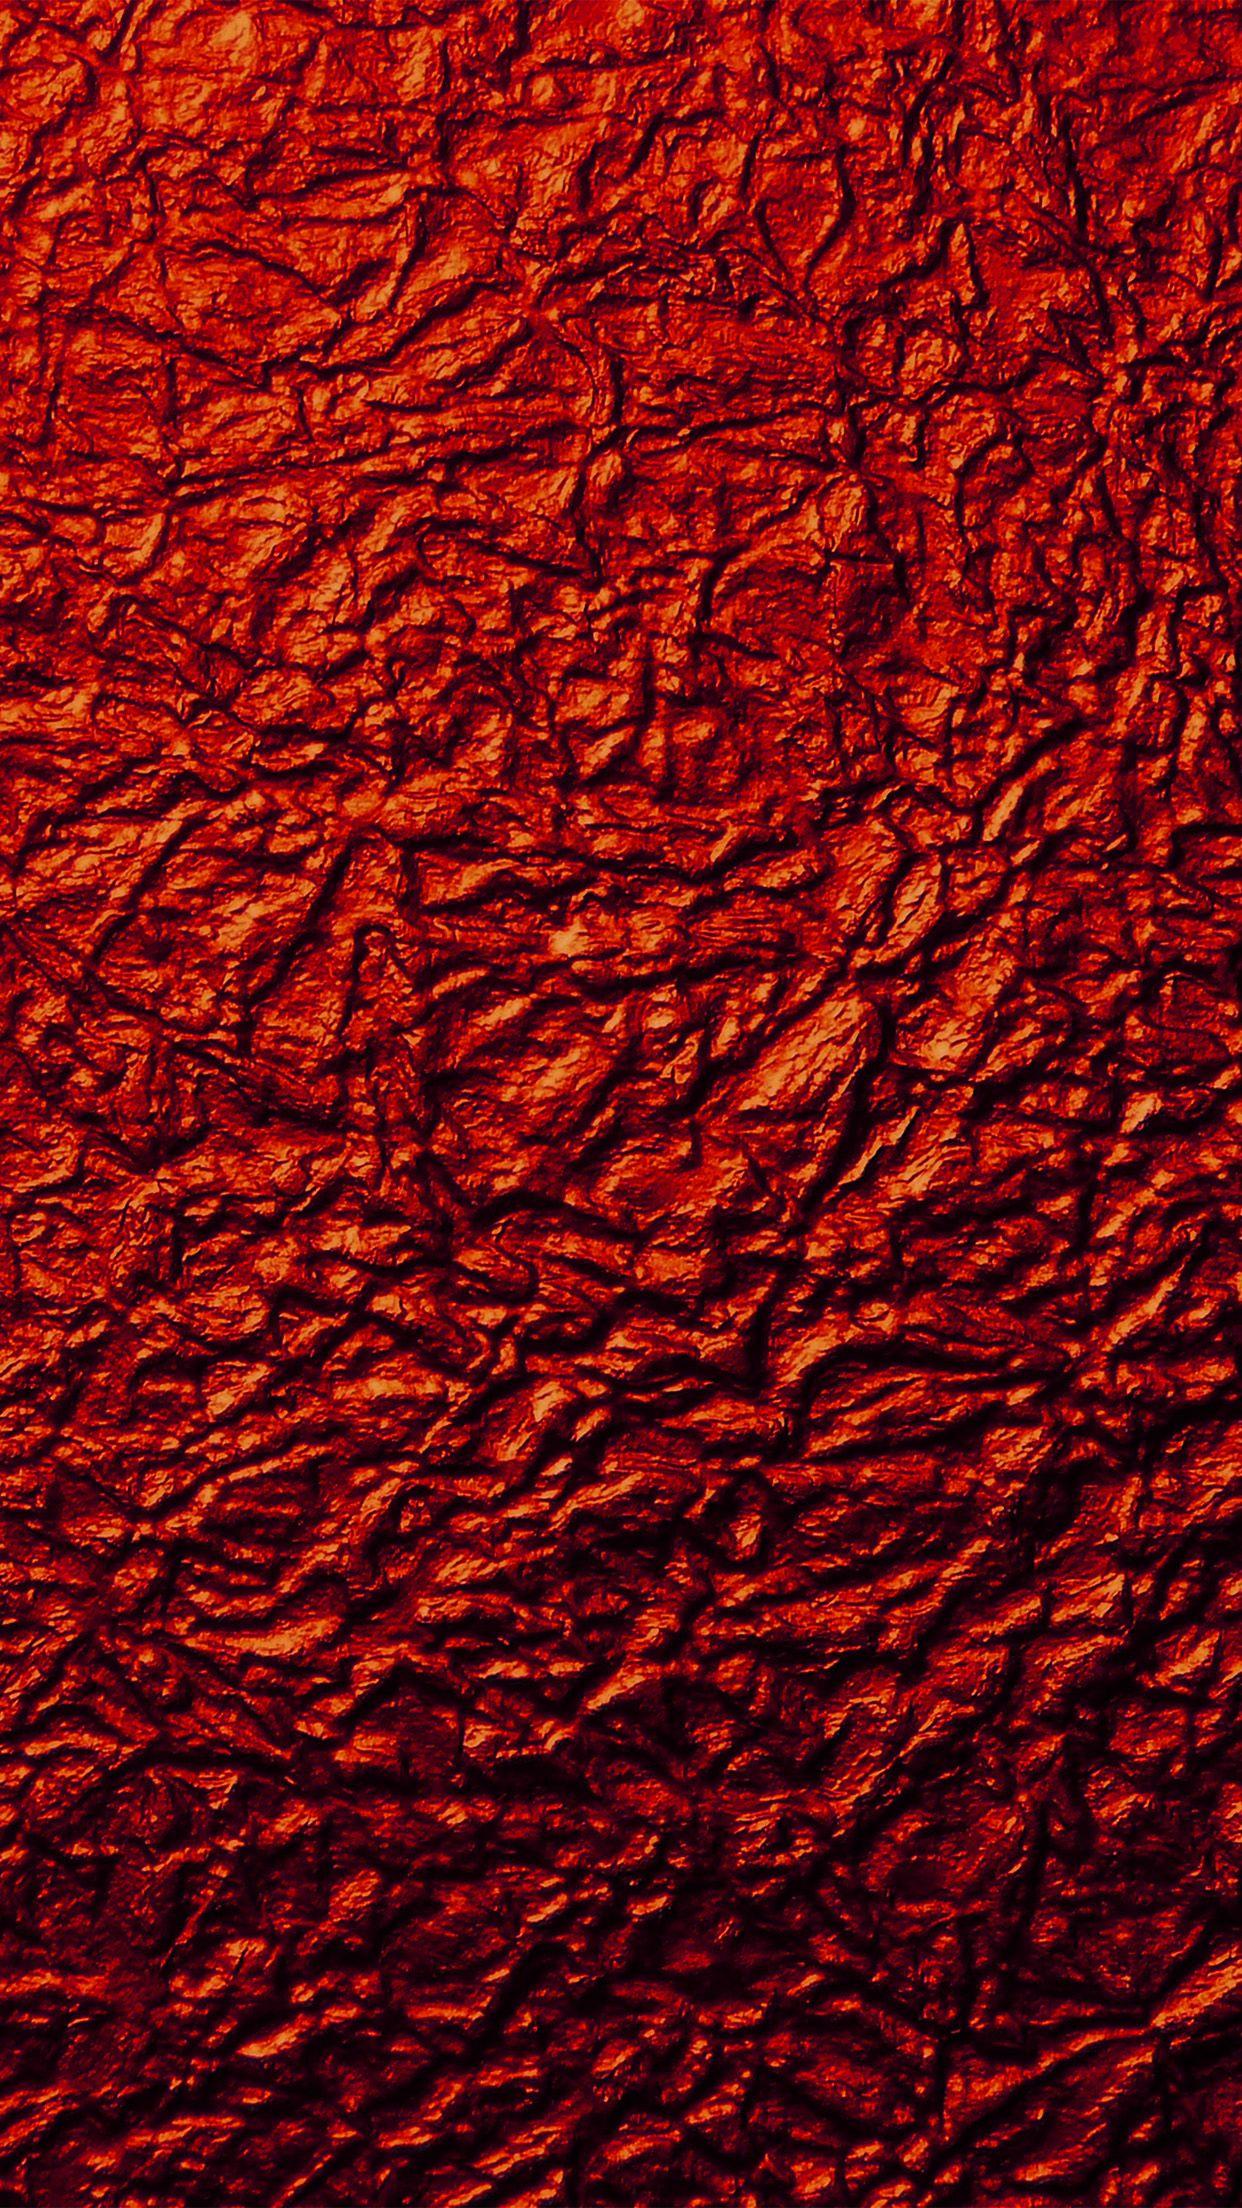 Red Texture Images  Free Download on Freepik